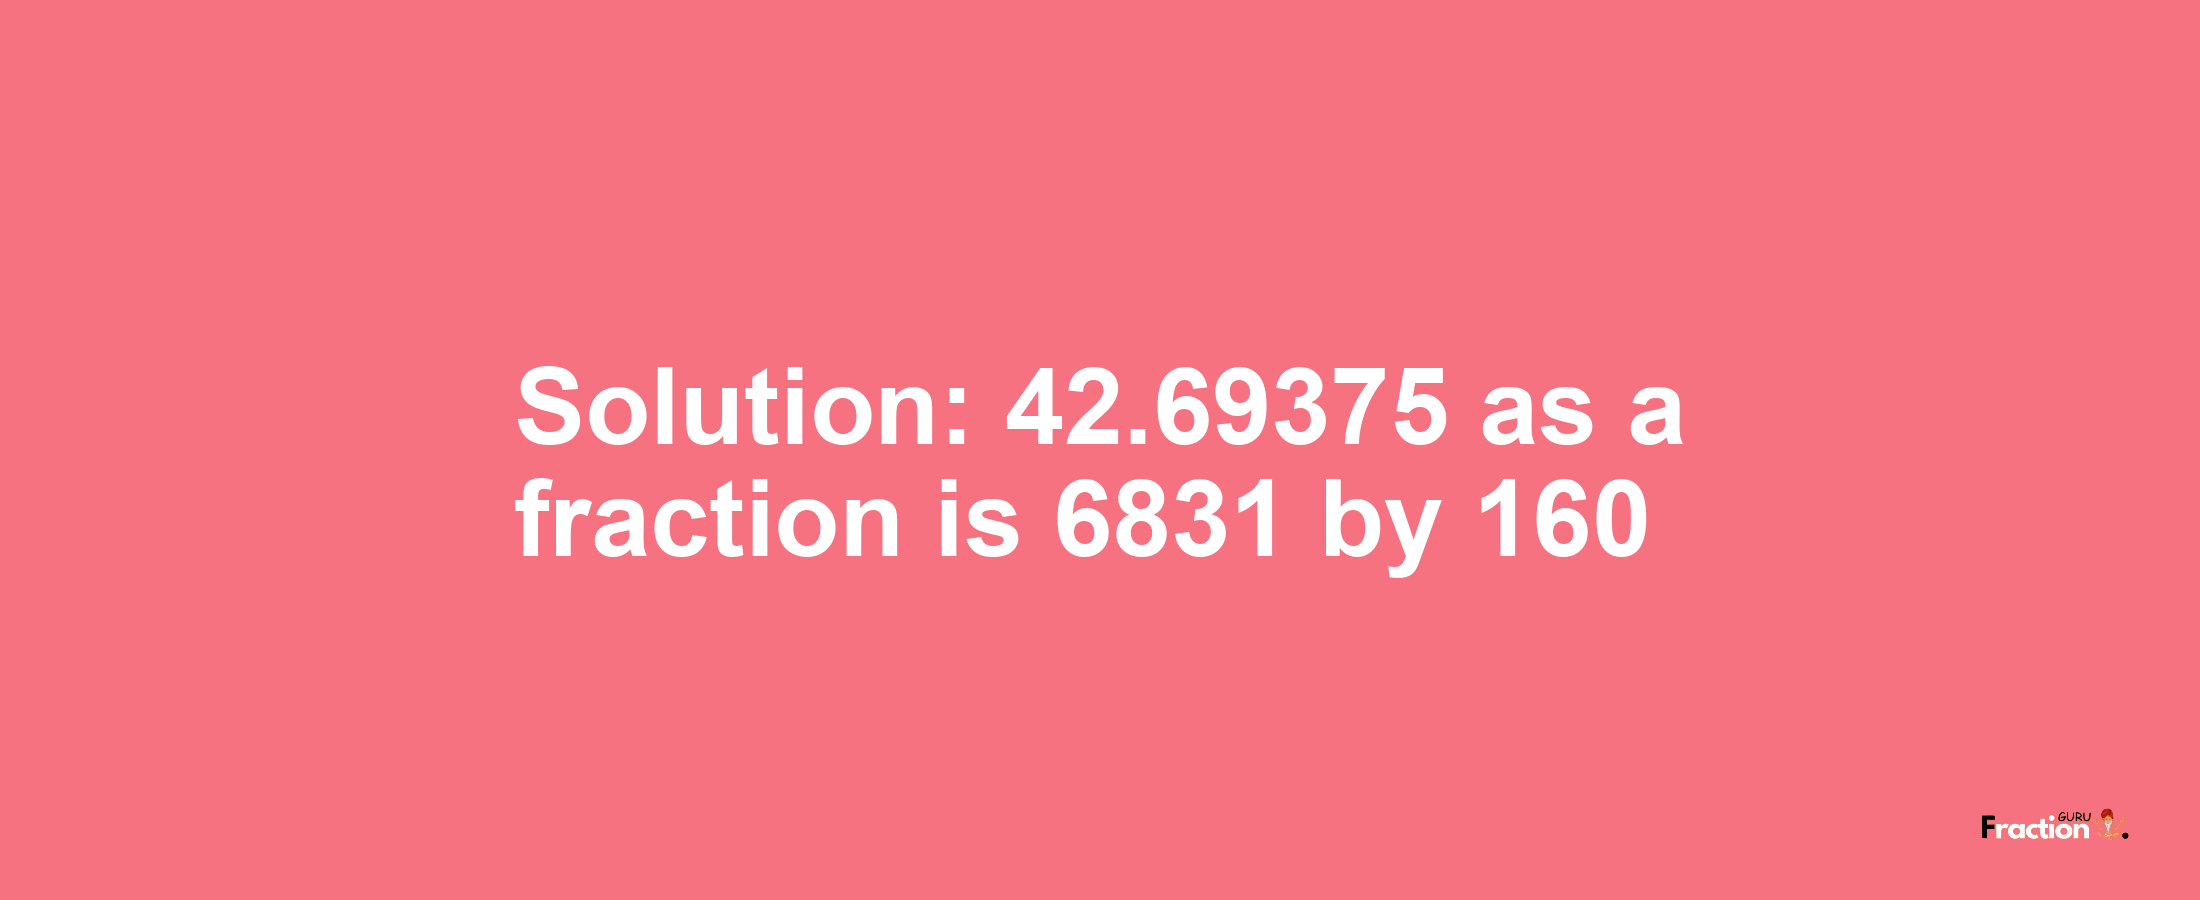 Solution:42.69375 as a fraction is 6831/160